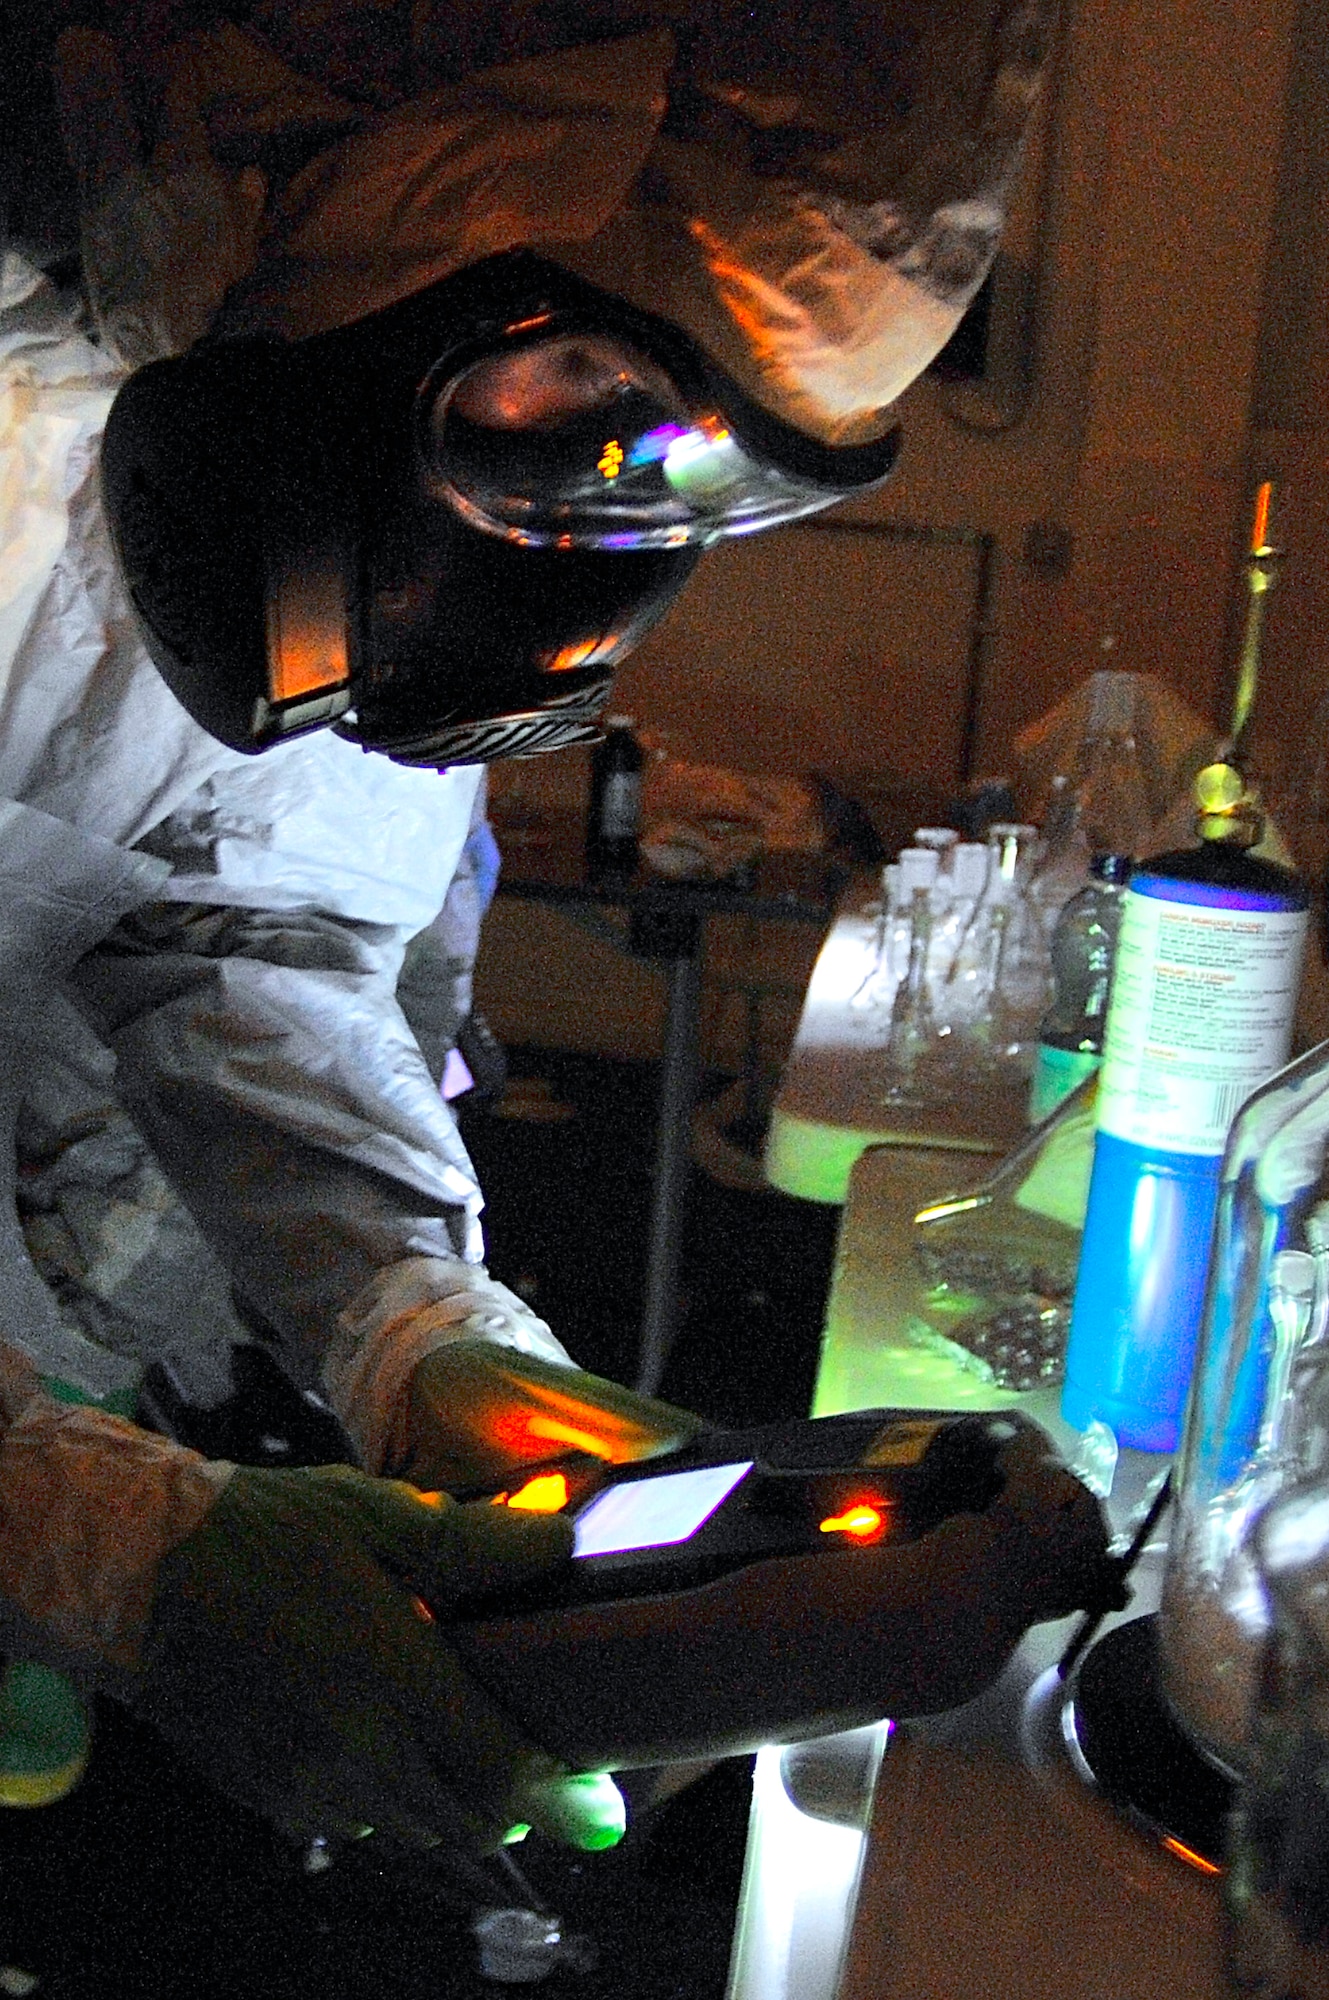 U.S. Air Force Staff Sgt. Joshua McDowell, 52nd Civil Engineer Squadron emergency manager, tests chemicals in a simulated emergency environment during the U.S.  Air Forces in Europe chemical, biological, radiological and nuclear challenge, Ramstein Air Base, Germany,  June 23, 2009. (U.S. Air Force photo by Staff Sgt. Stephen J. Otero)